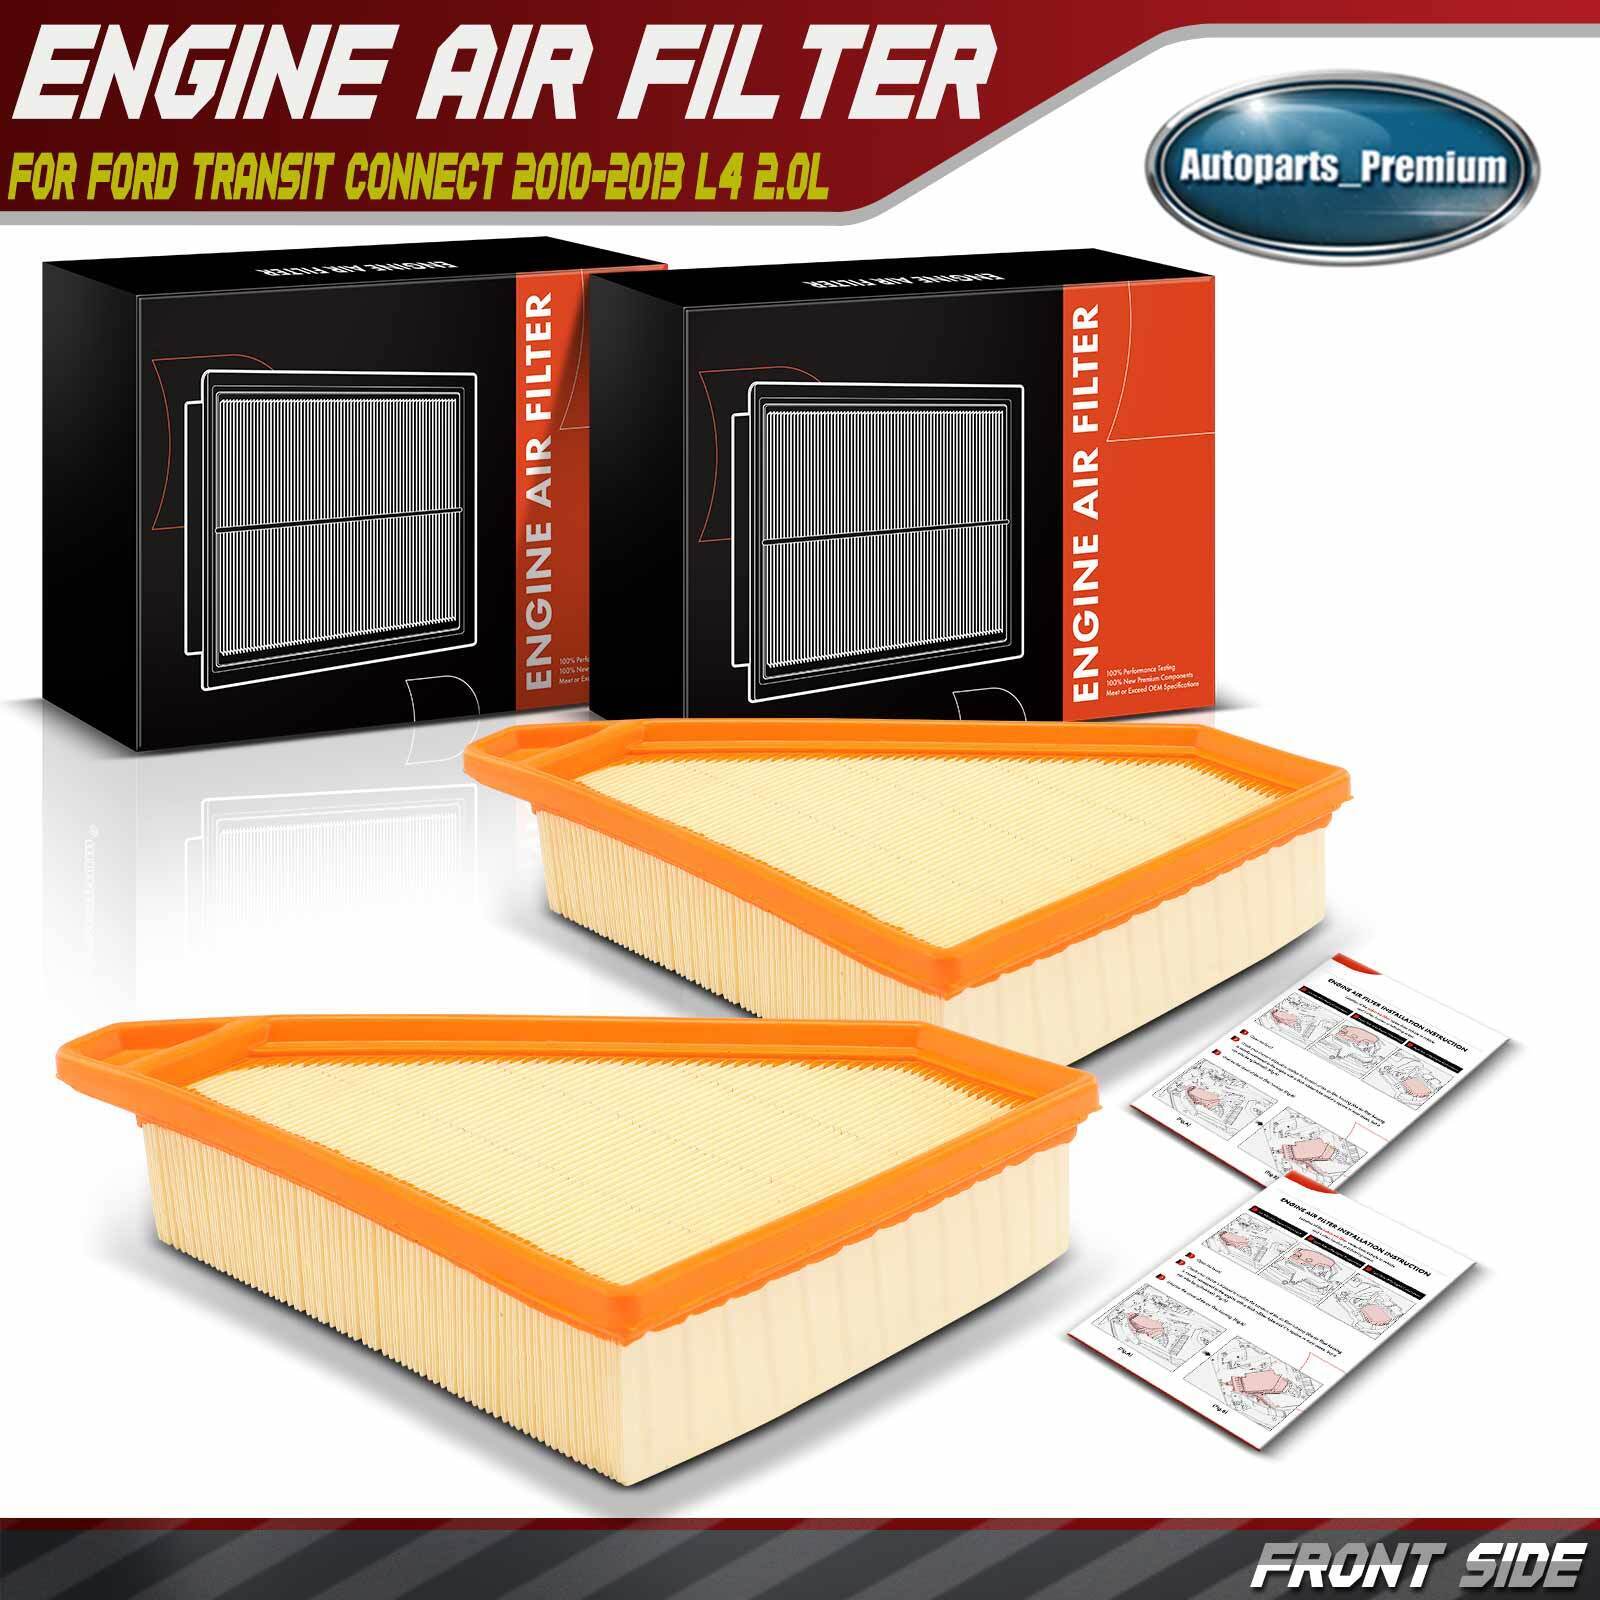 2x Engine Air Filter for Ford Transit Connect 2010-2013 L4 2.0L Flexible Panel